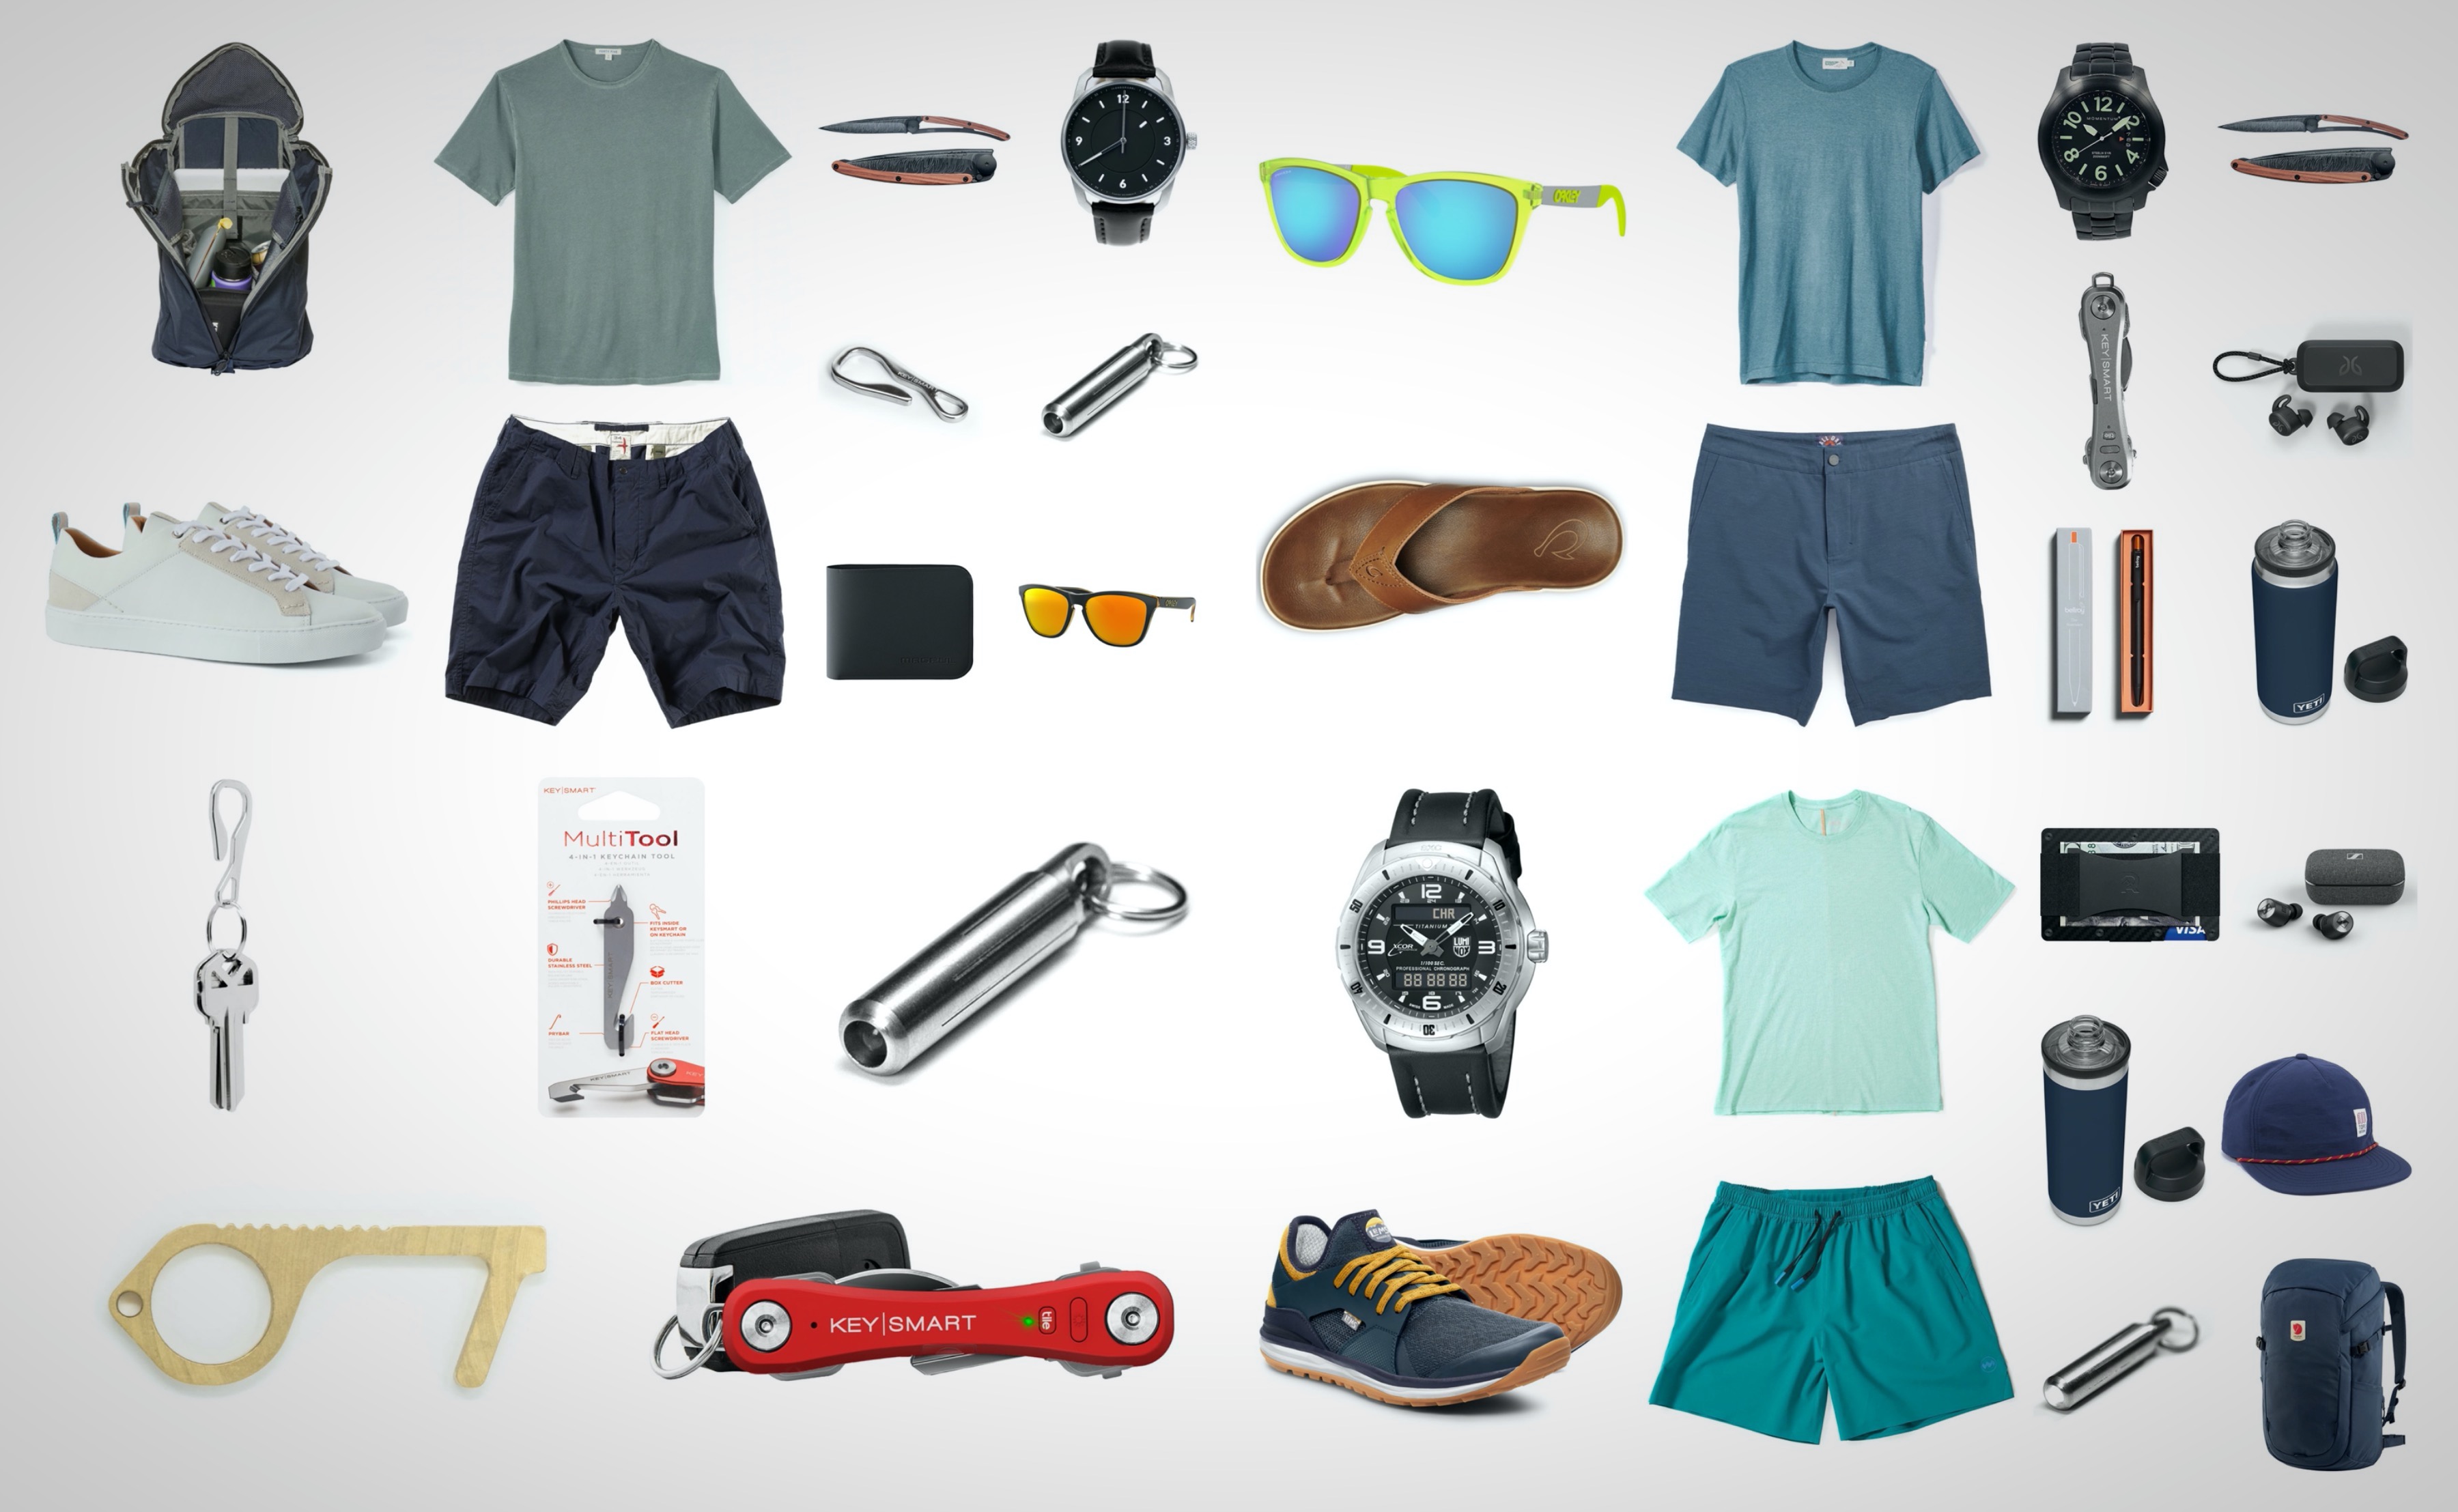 50 'Things We Want' This Week: Pocket Tools, Summer Essentials, Whiskey ...